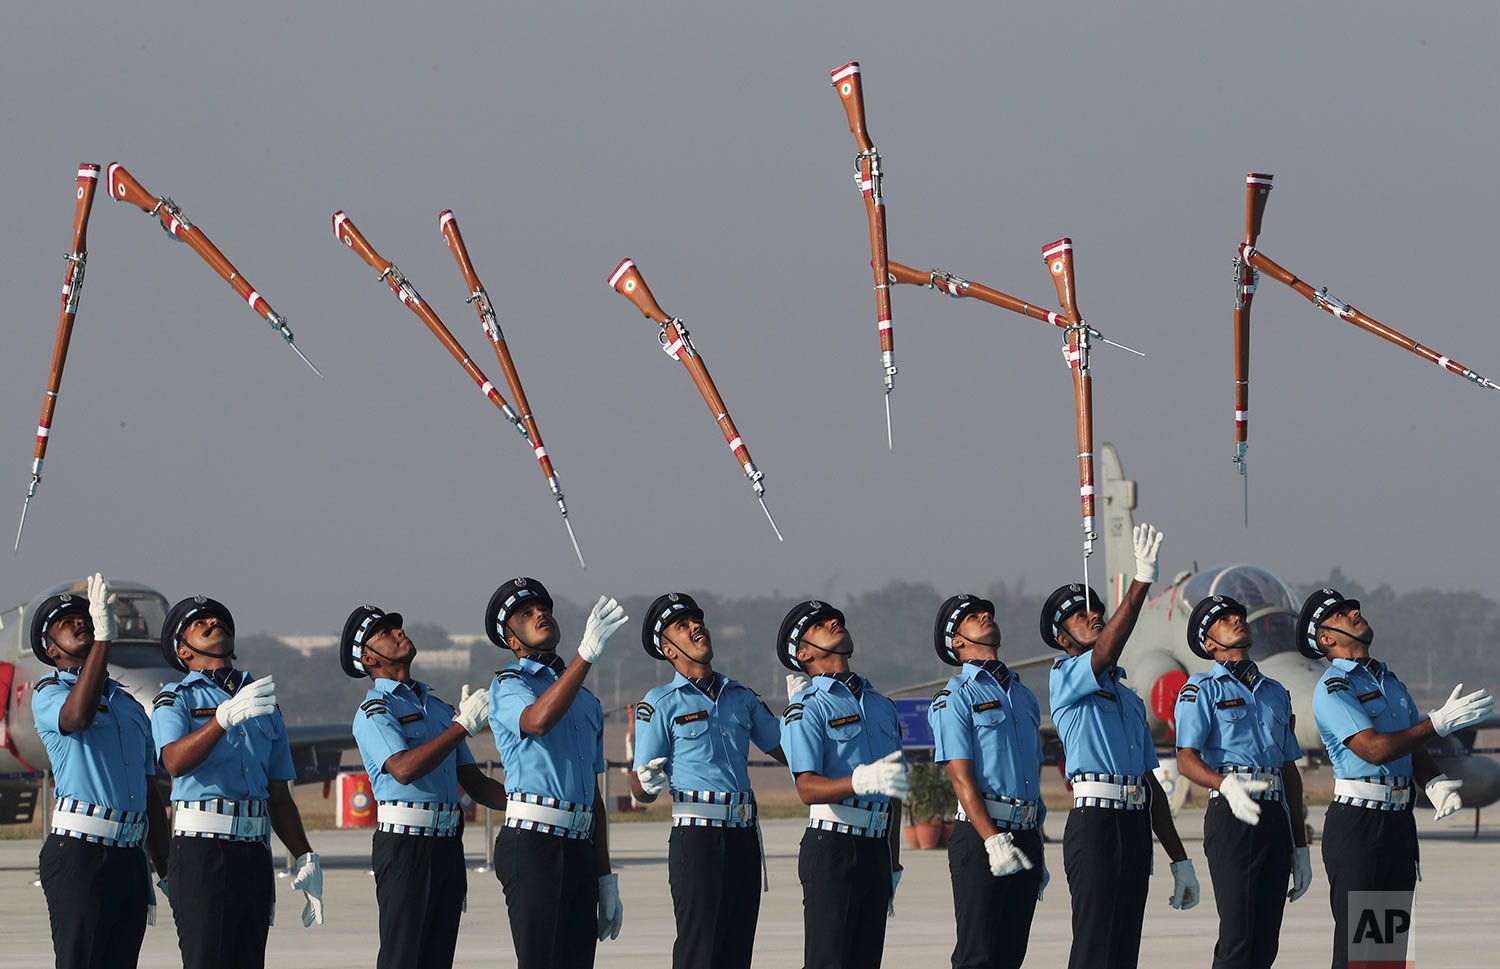  An Indian Air Force Air Warrior drill team displays rifle handling skills during a graduation ceremony of new cadets at the Air Force Academy in Dundigal, on the outskirts of Hyderabad, India, Saturday, Dec. 18, 2021. (AP Photo/Mahesh Kumar A.) 